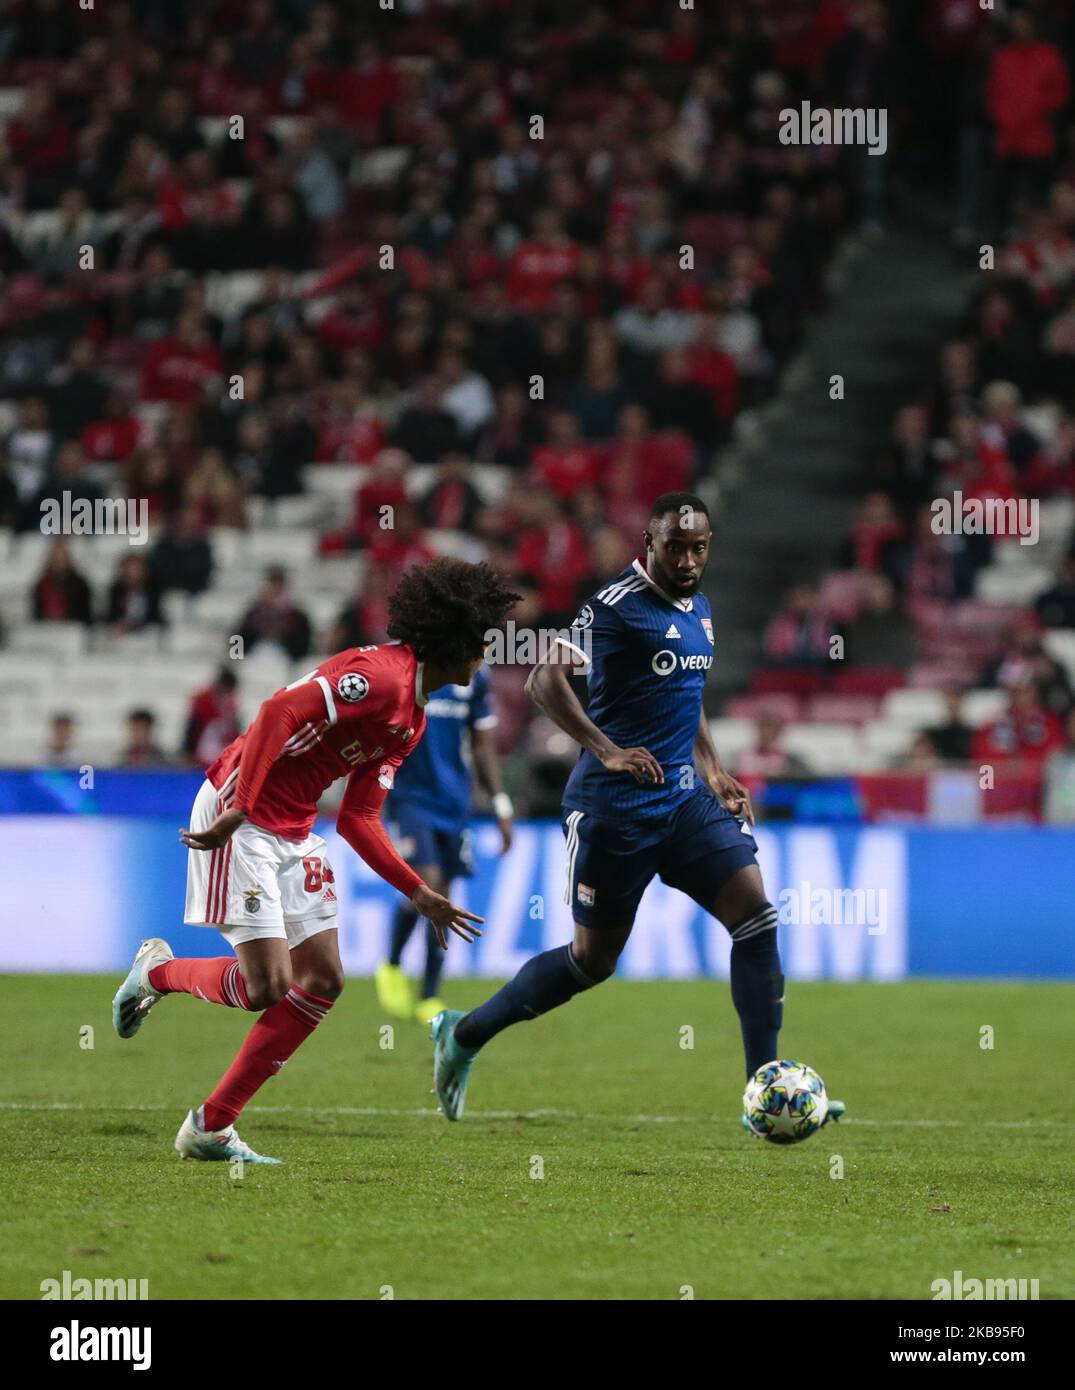 Lyon Forward Moussa Dembele in action during the UEFA Champions League Group G match between SL Benfica and Olympique Lyon at Estadio da Luz on October 23, 2019 in Lisbon, Portugal. (Photo by Paulo Nascimento/DPI/NurPhoto) Stock Photo